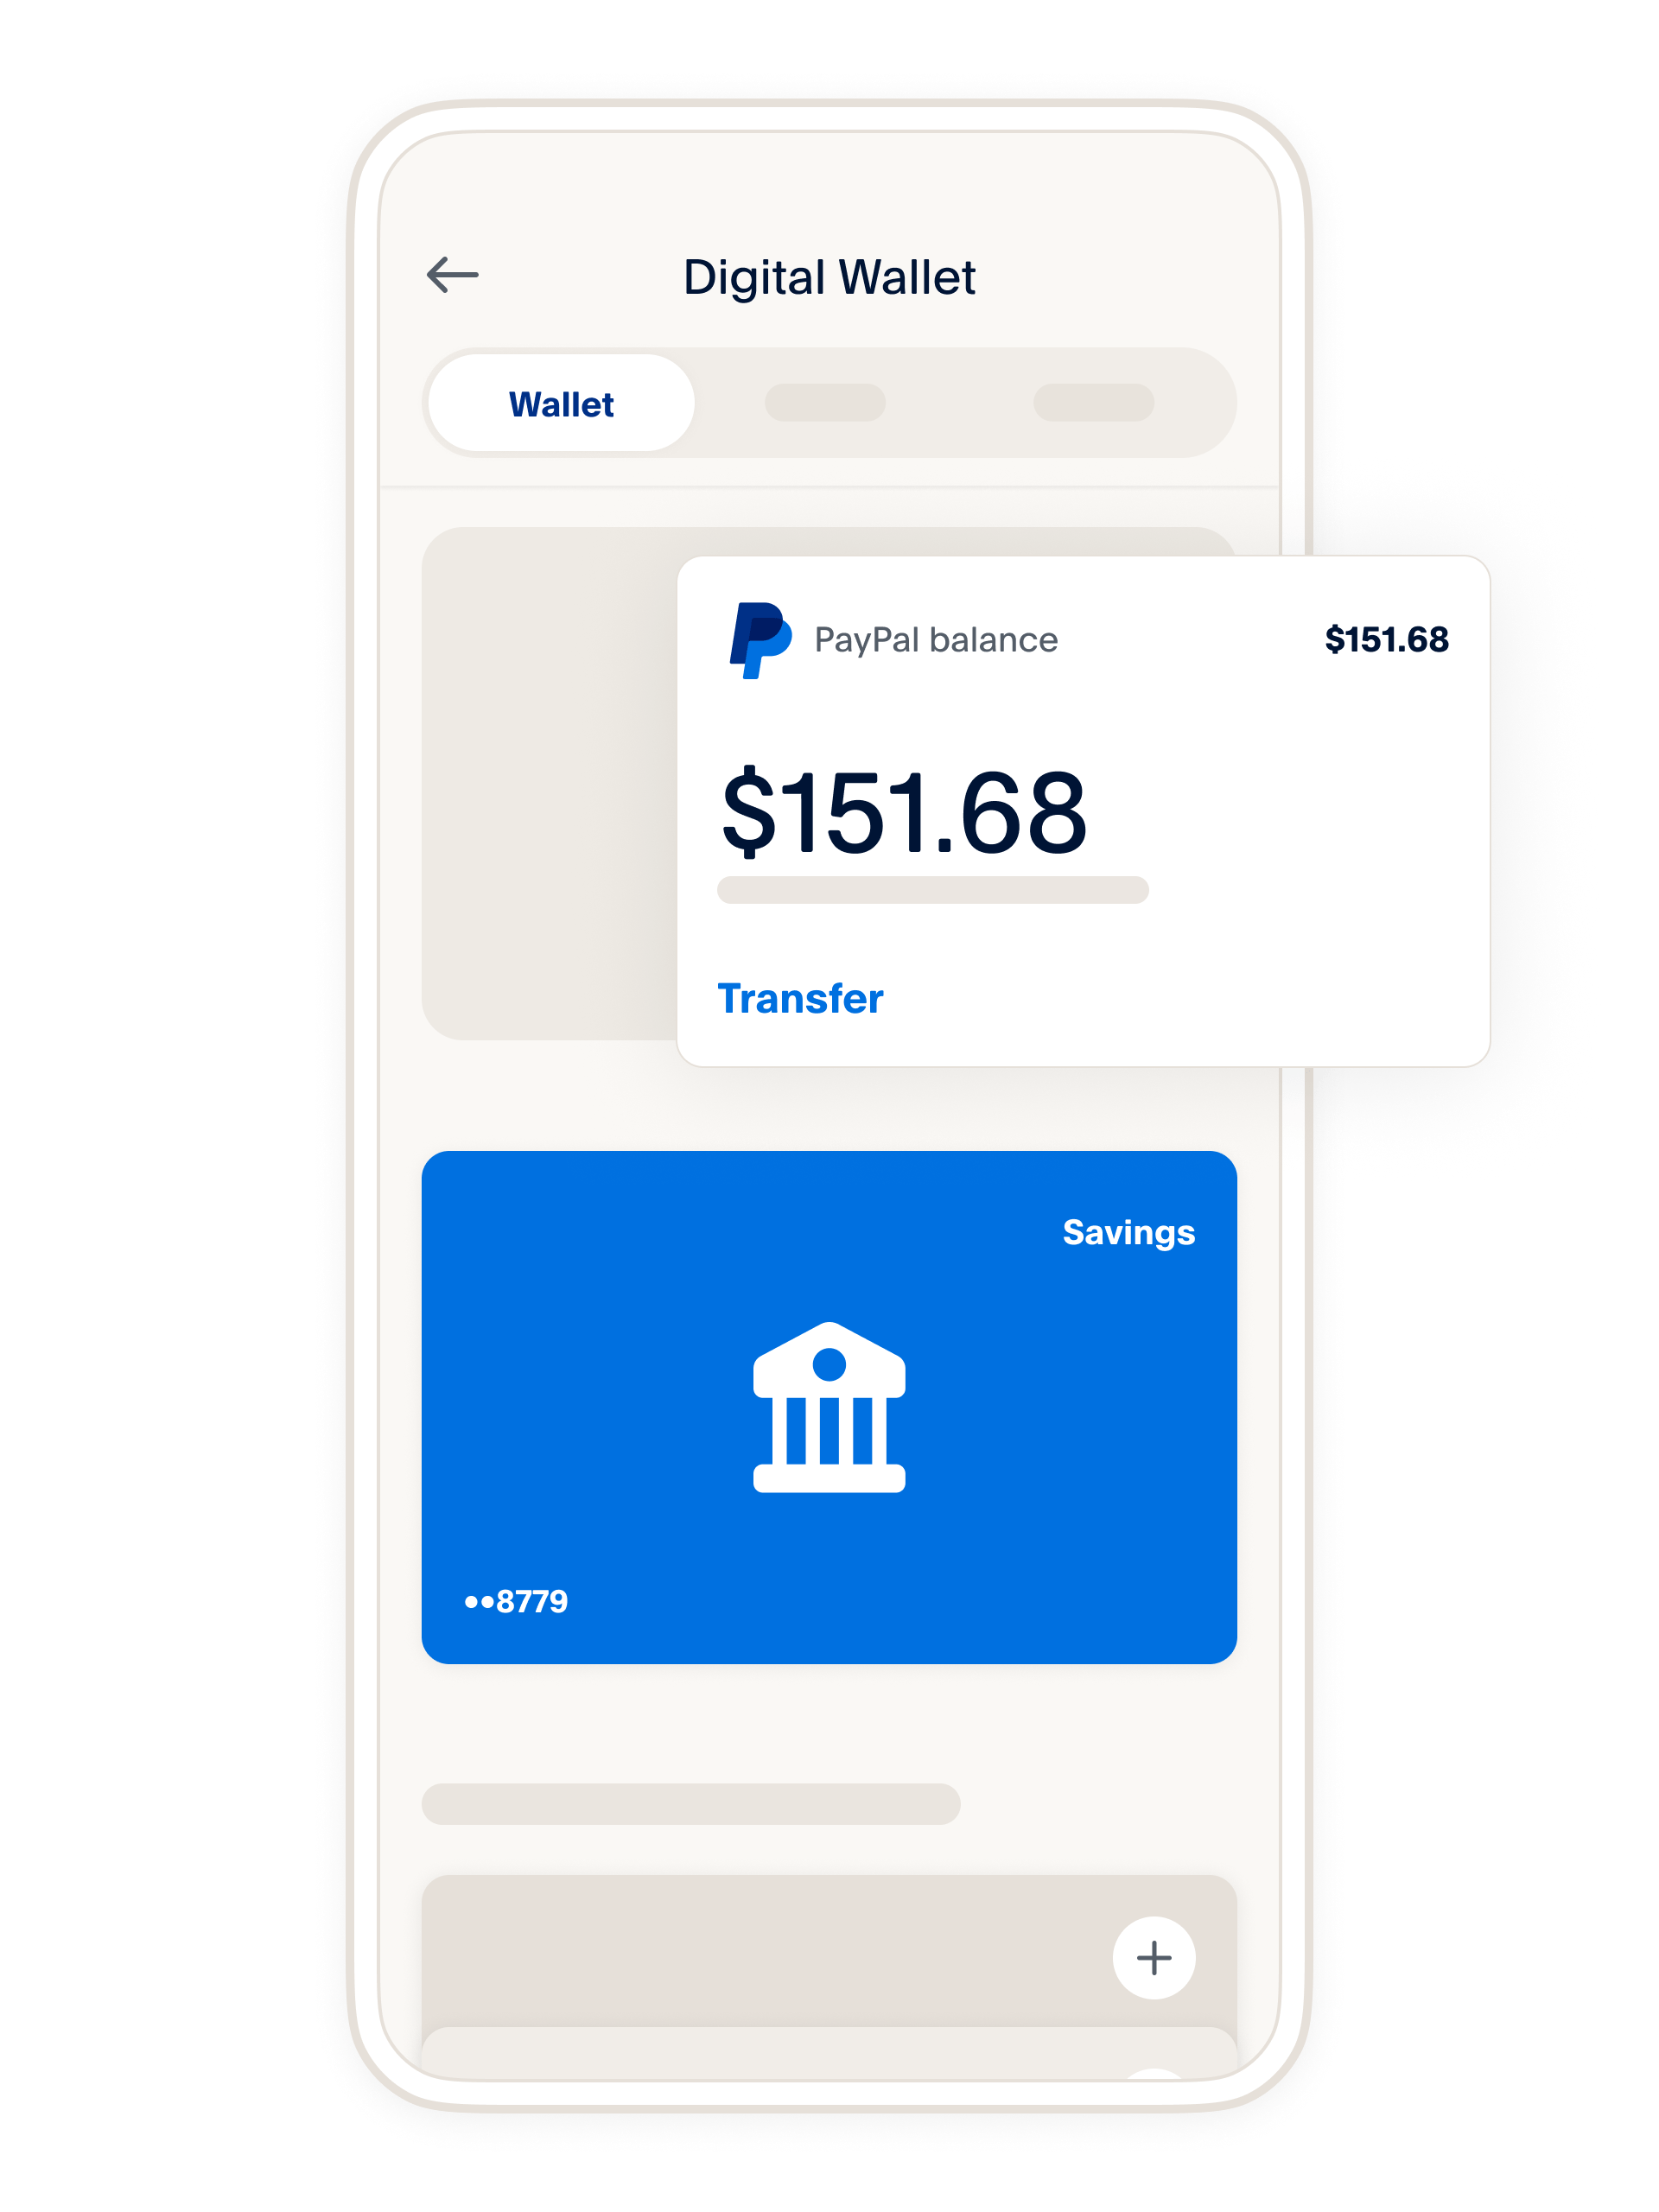 https://www.paypalobjects.com/marketing/web/au/the-paypal-app/split-section-1-size-all_v2.png